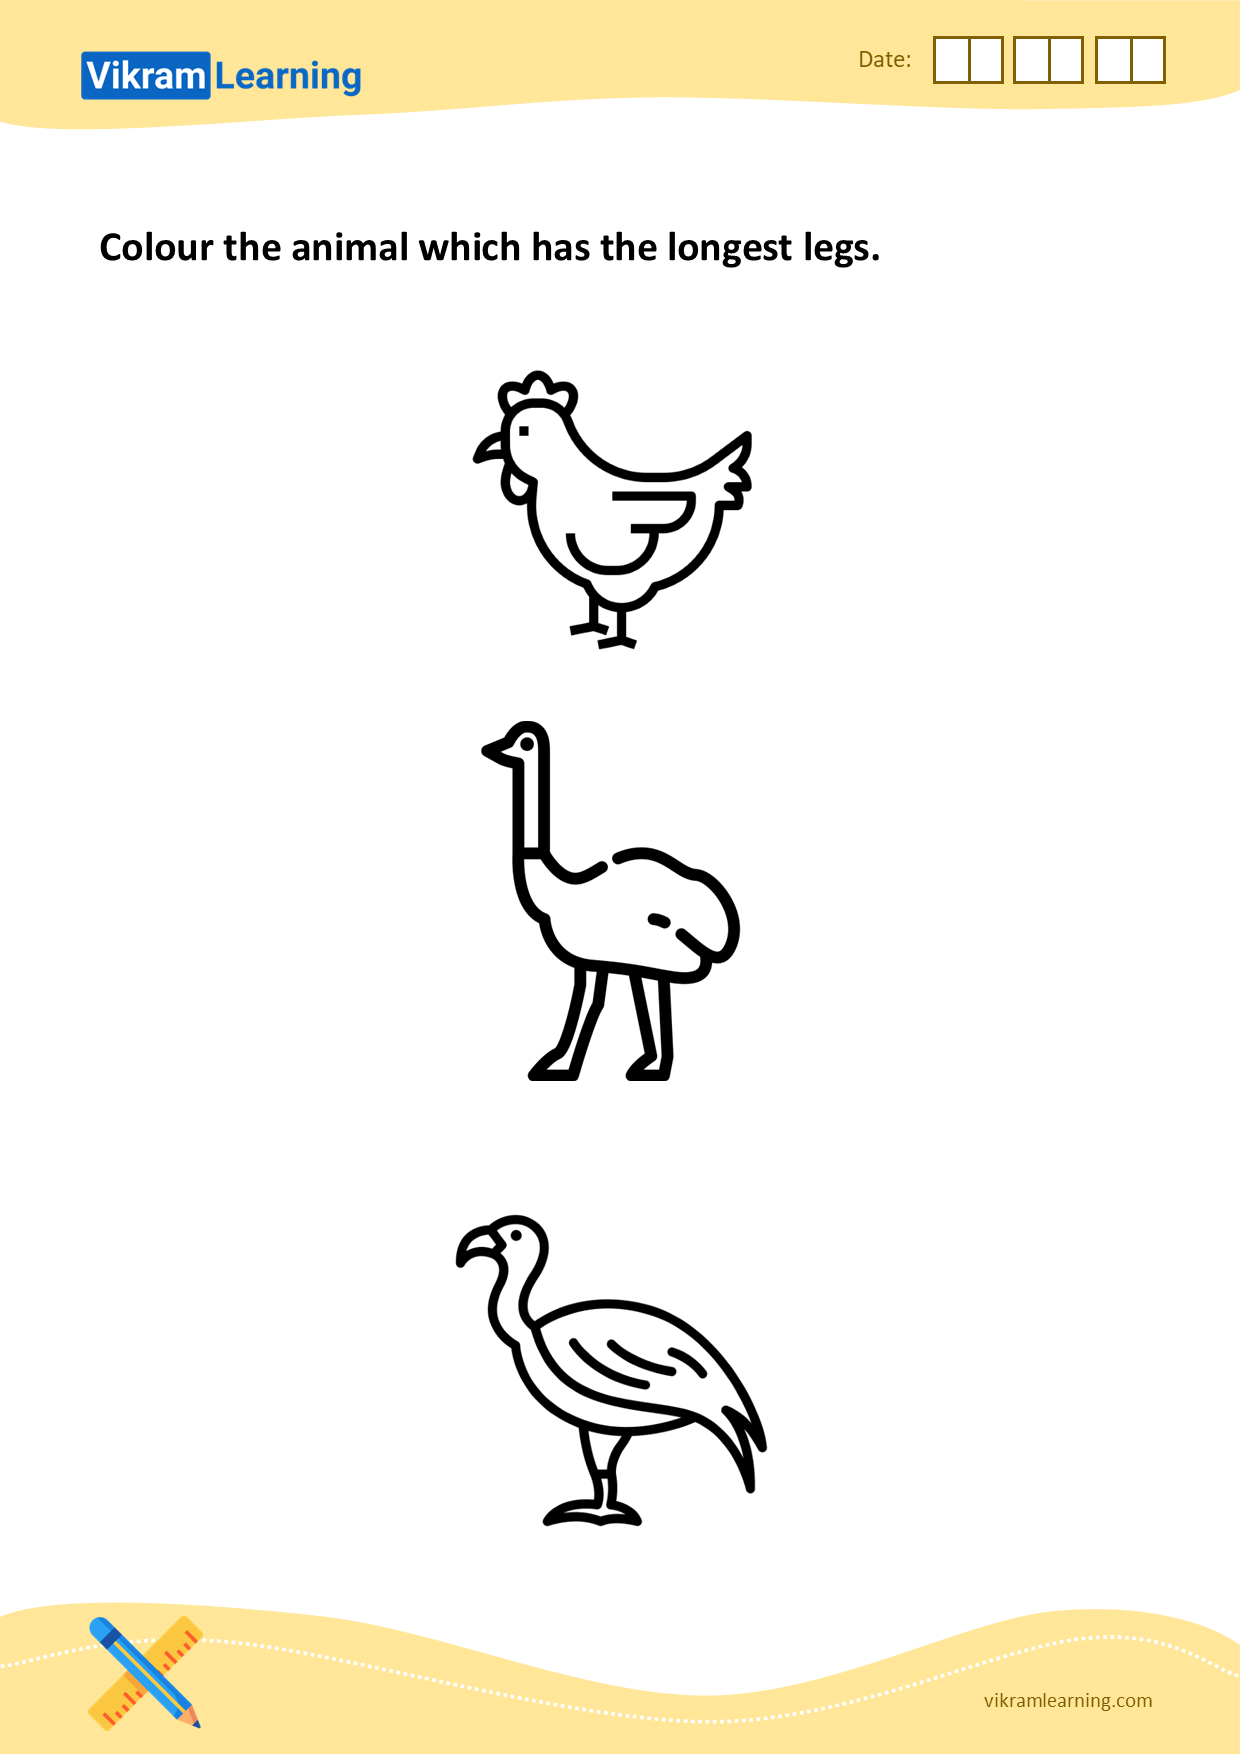 Download colour the animal which has the longest legs worksheets